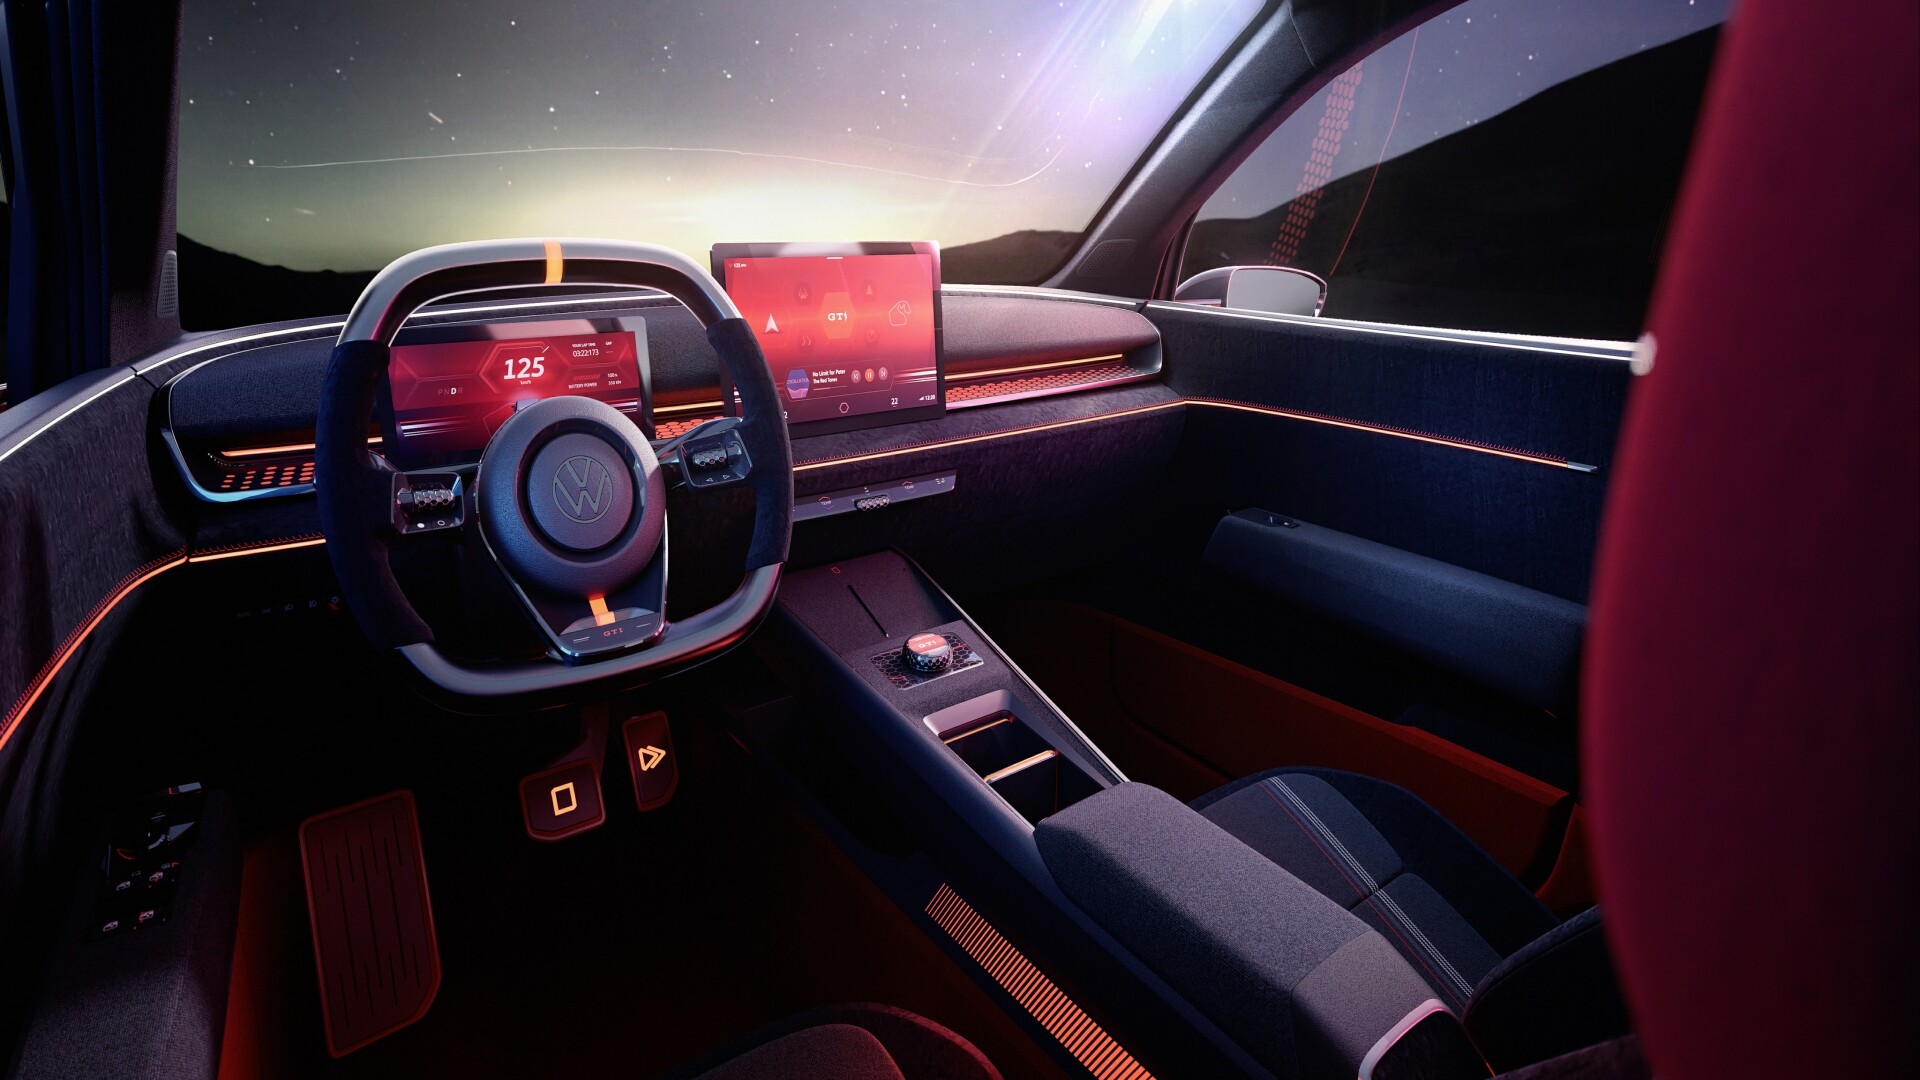 The Concept Interior, Steering, And Center Console Of The Volkswagen ID GTI EV